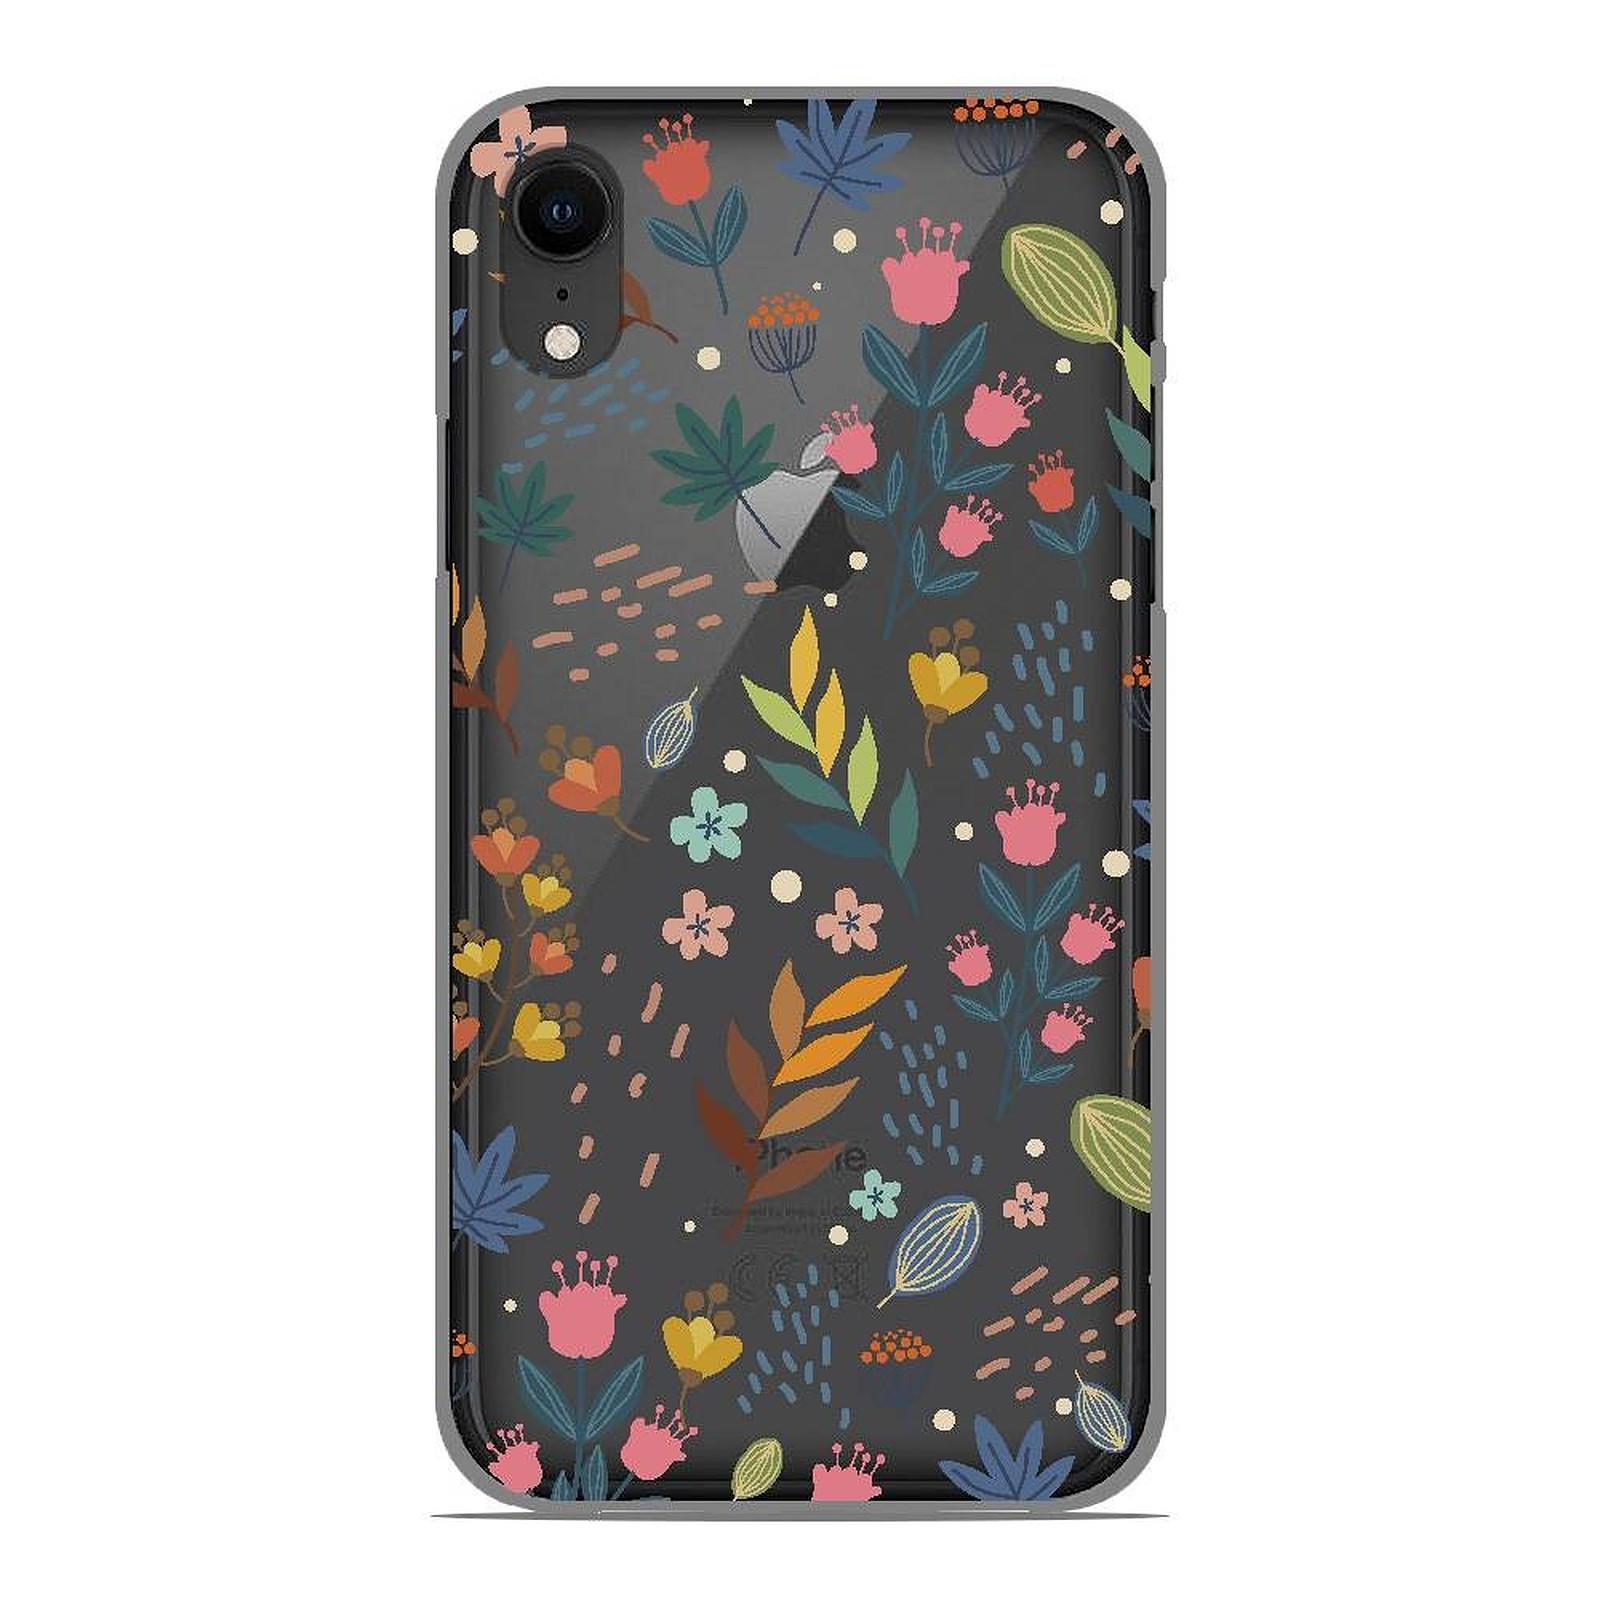 1001 Coques Coque silicone gel Apple iPhone XR motif Fleurs colorees - Coque telephone 1001Coques